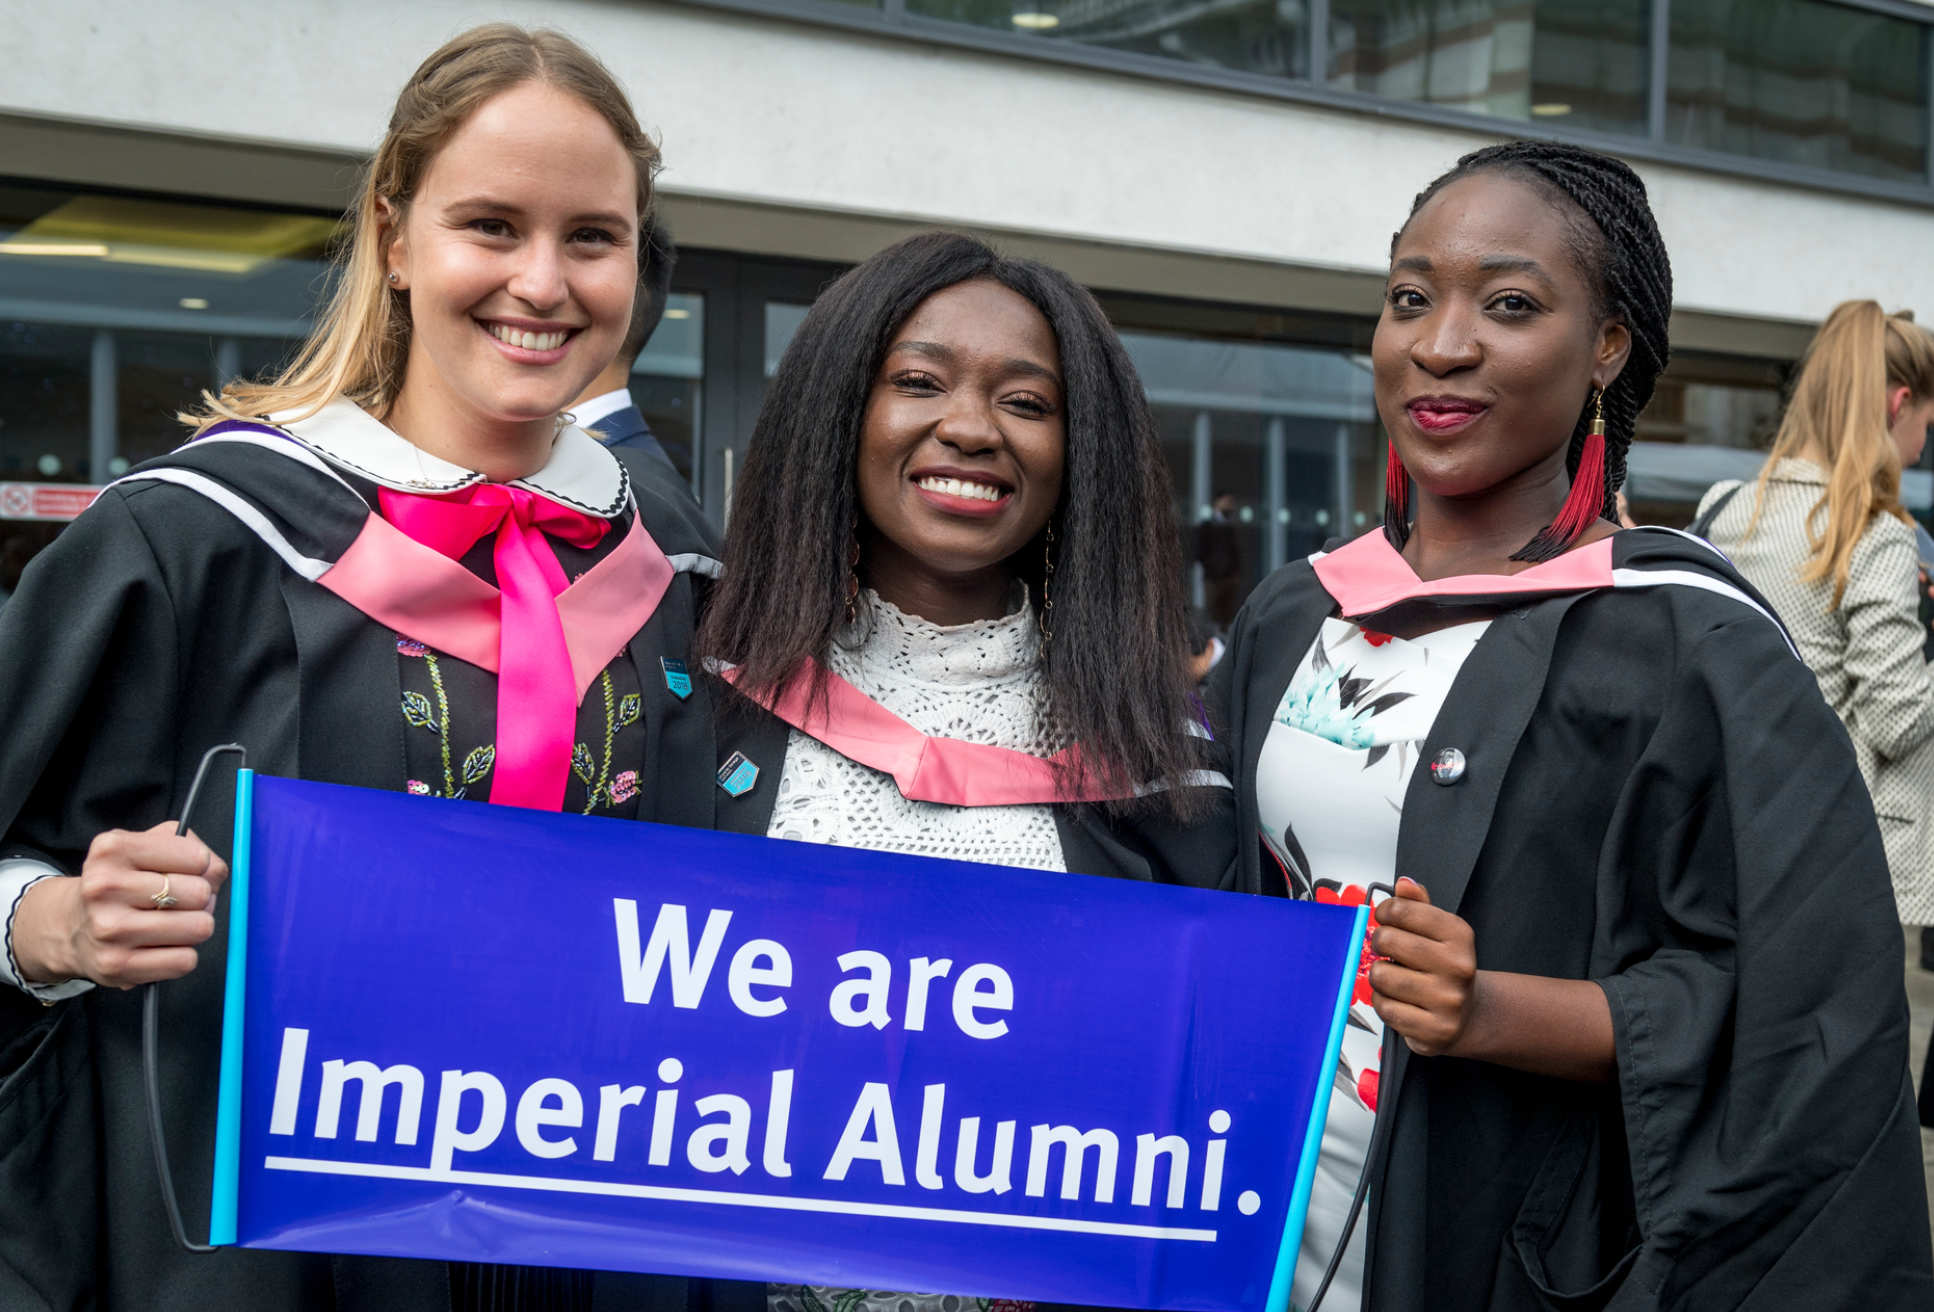 Students hold up 'We are Imperial Alumni' sign